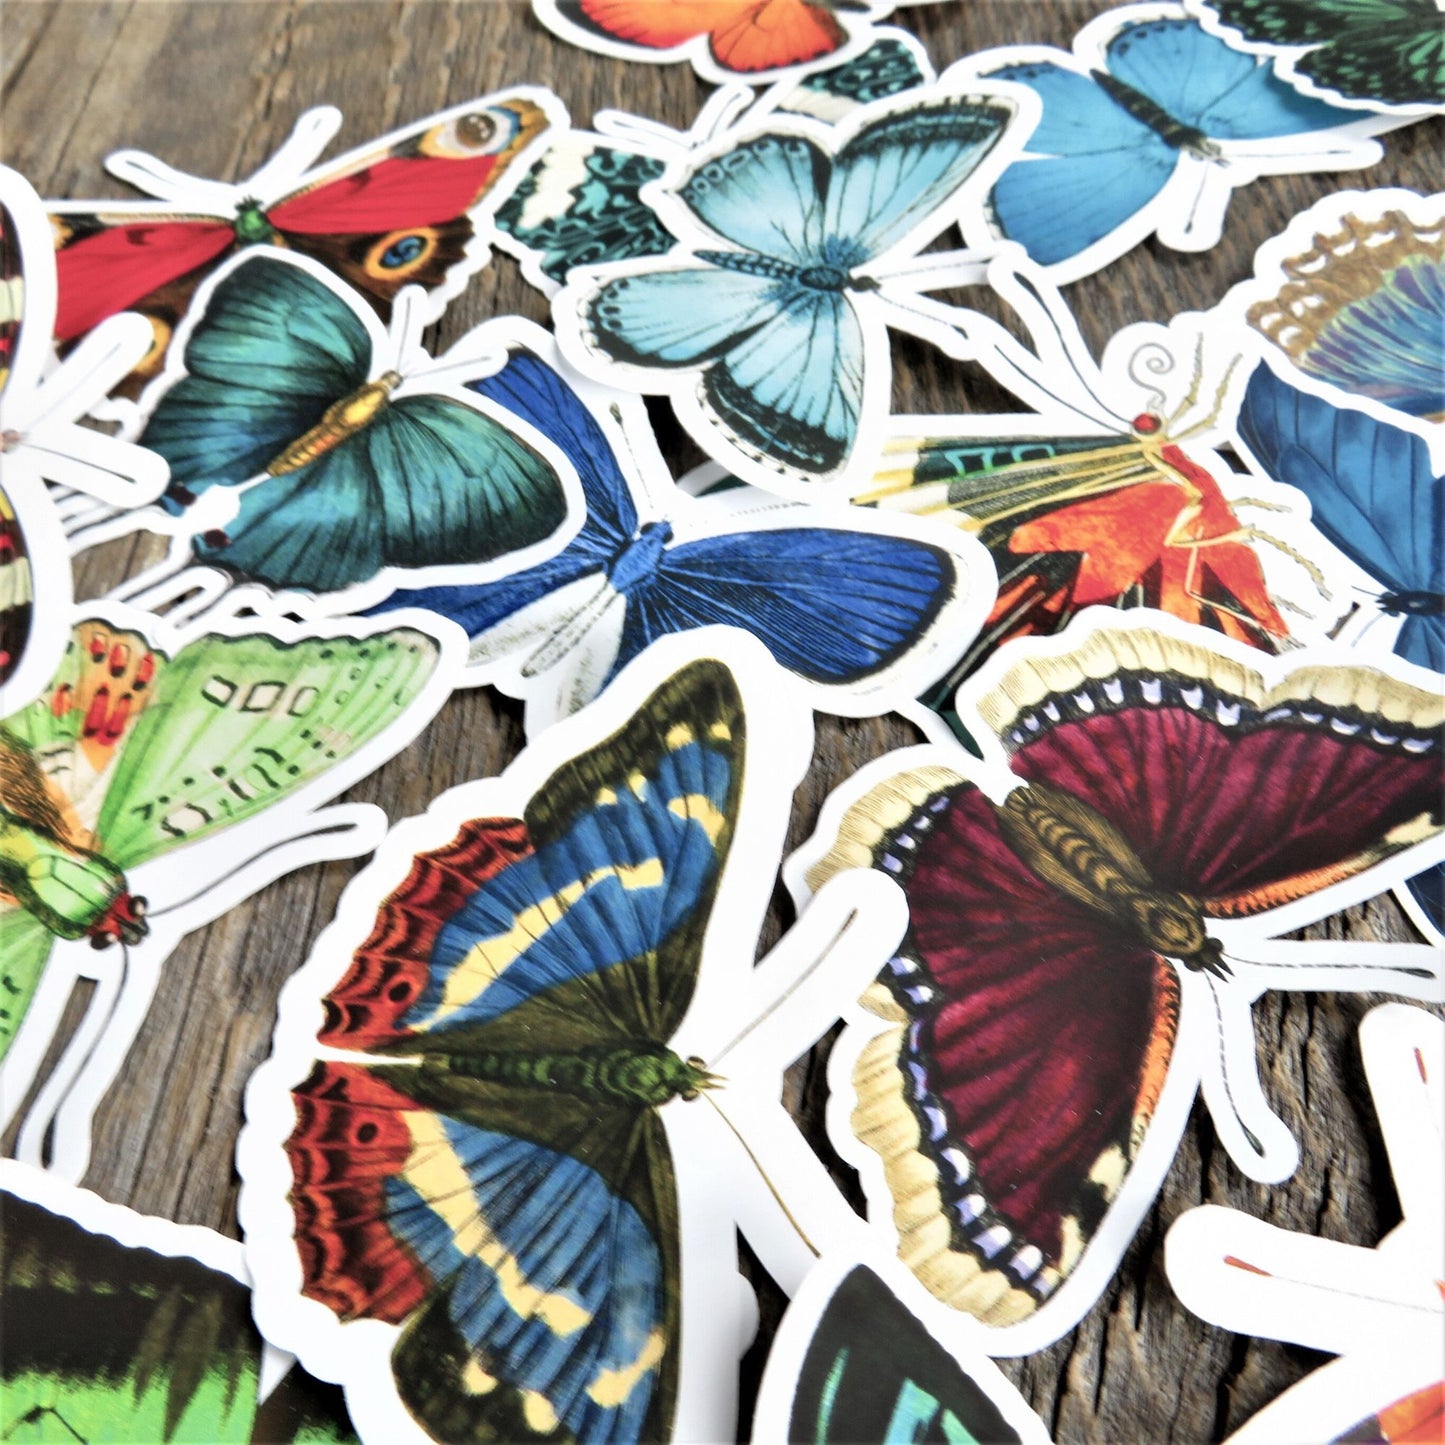 Butterfly and Moth Sticker Lot Large Vintage Style Set of 22 Multicolored Junk Journal Scrapbook Multimedia Mixed Art